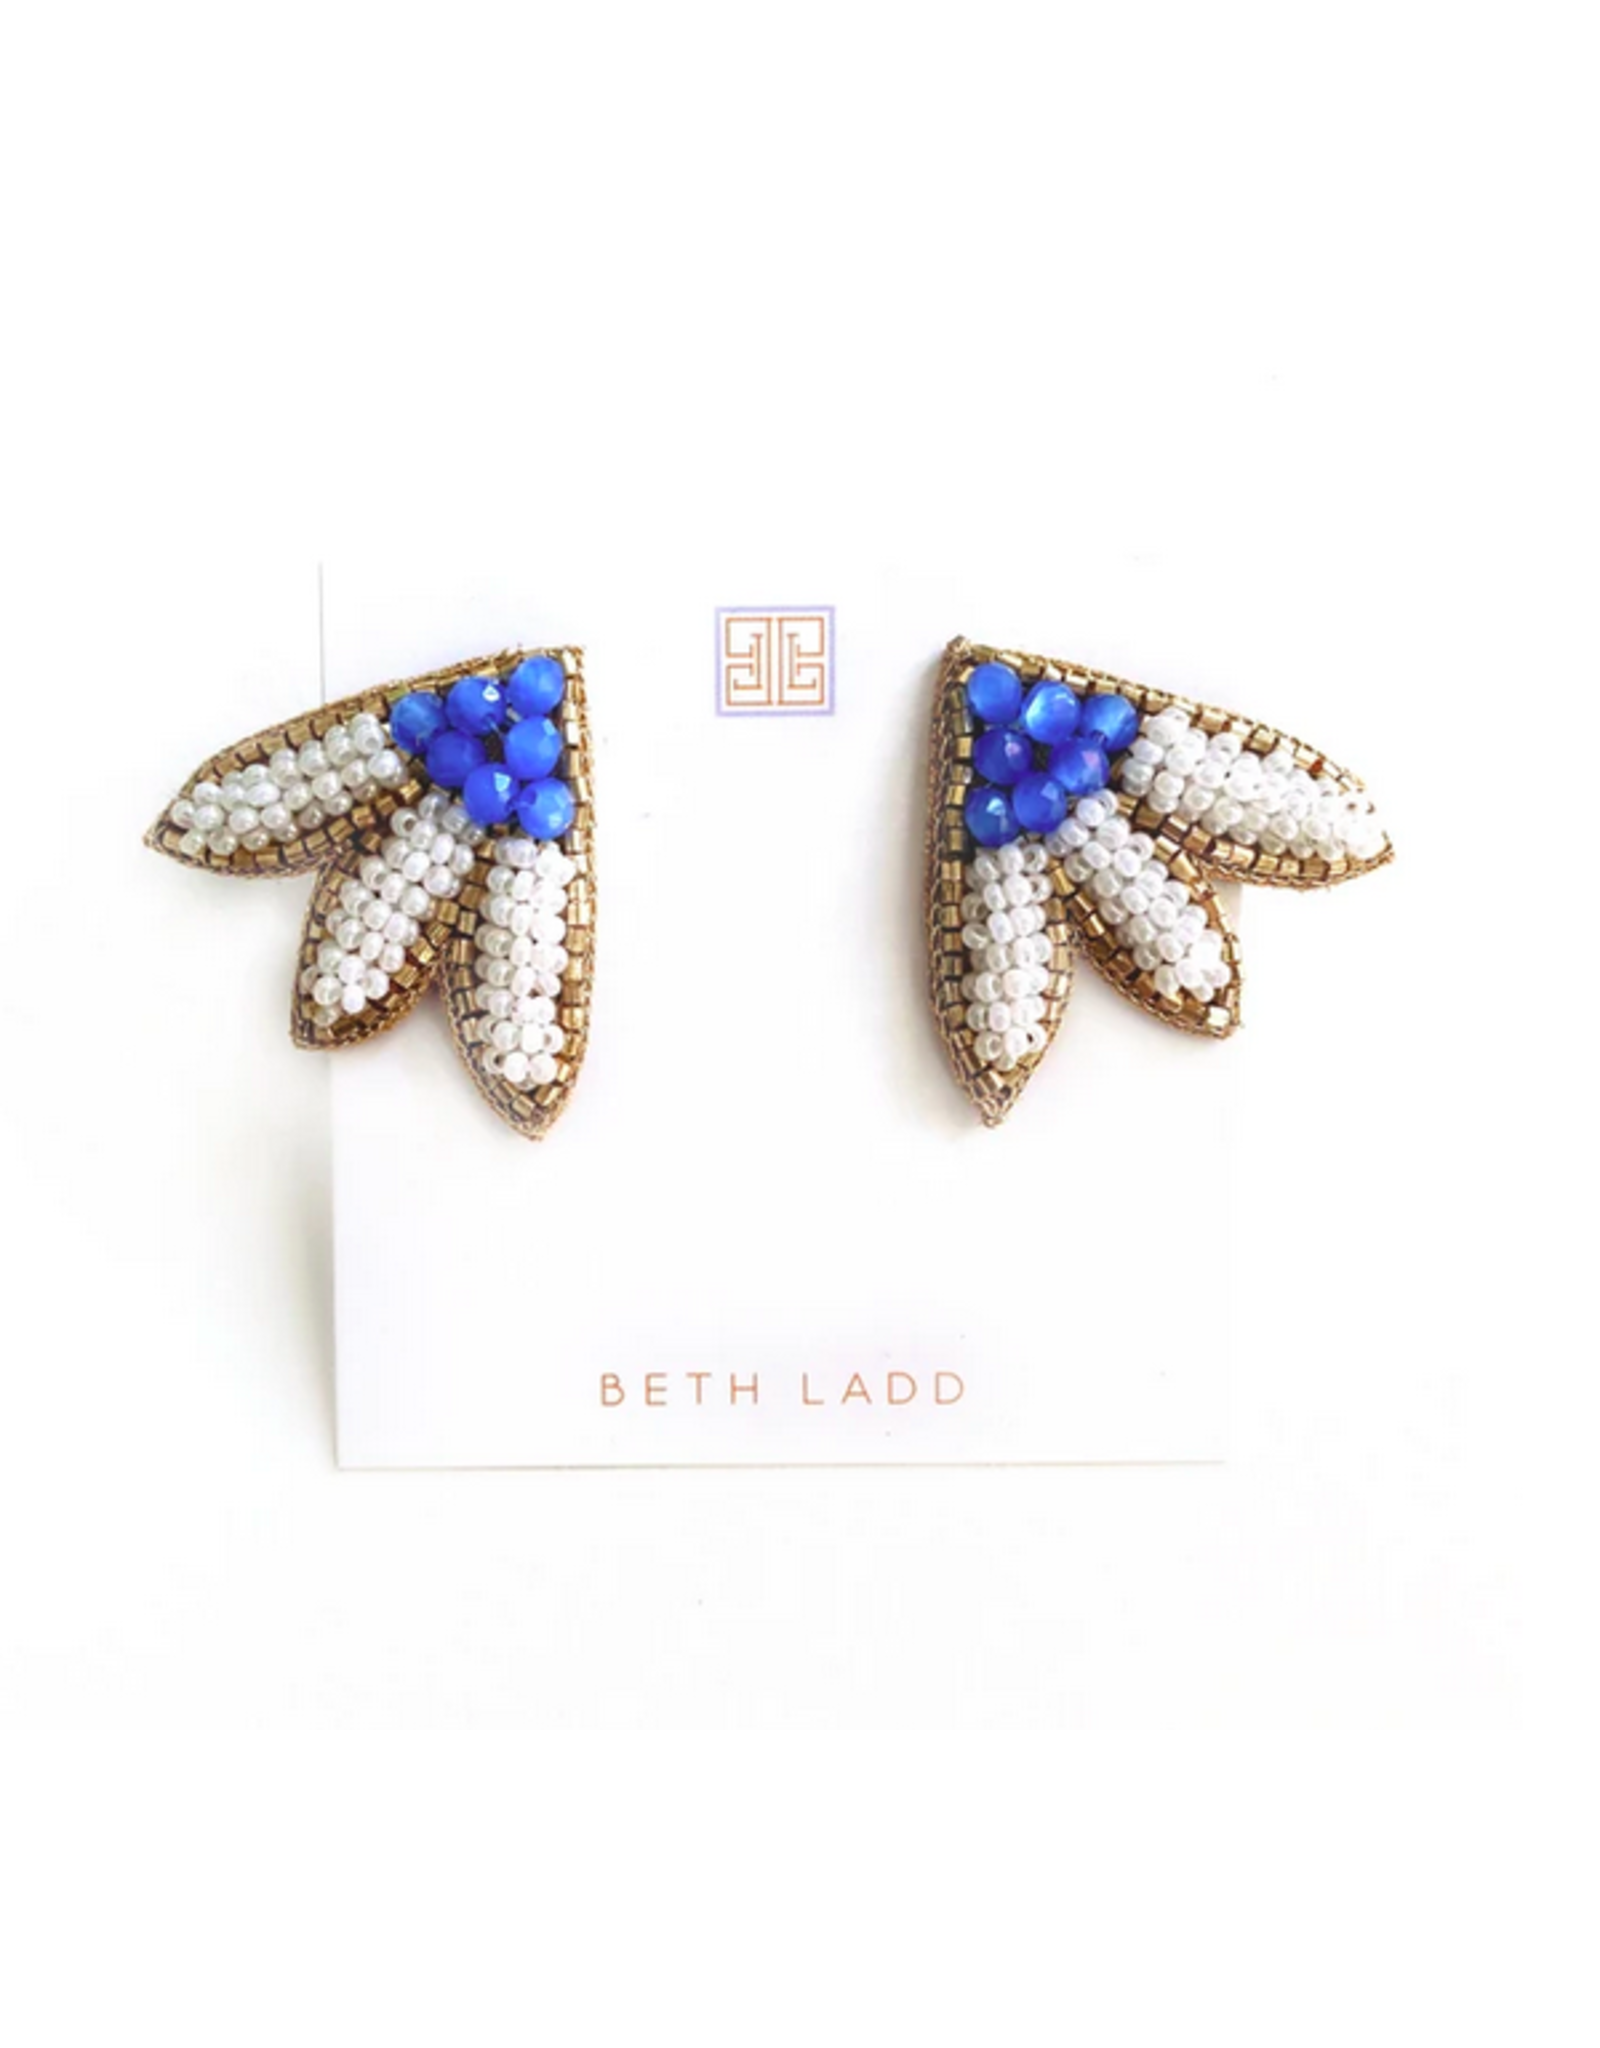 Beth Ladd Collection Calypso Studs in White and Blue by Beth Ladd